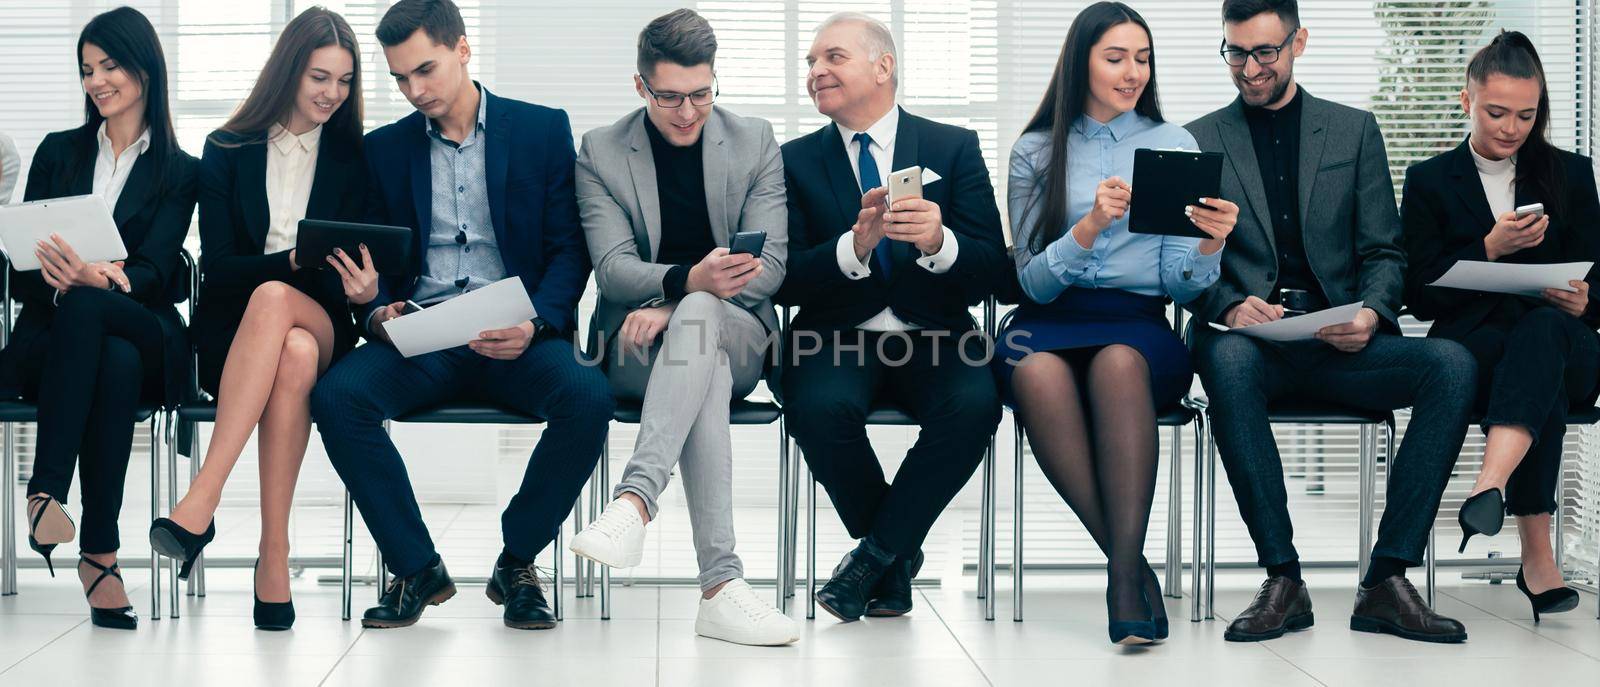 group of business people use their gadgets before starting a business meeting. photo with a copy of the space